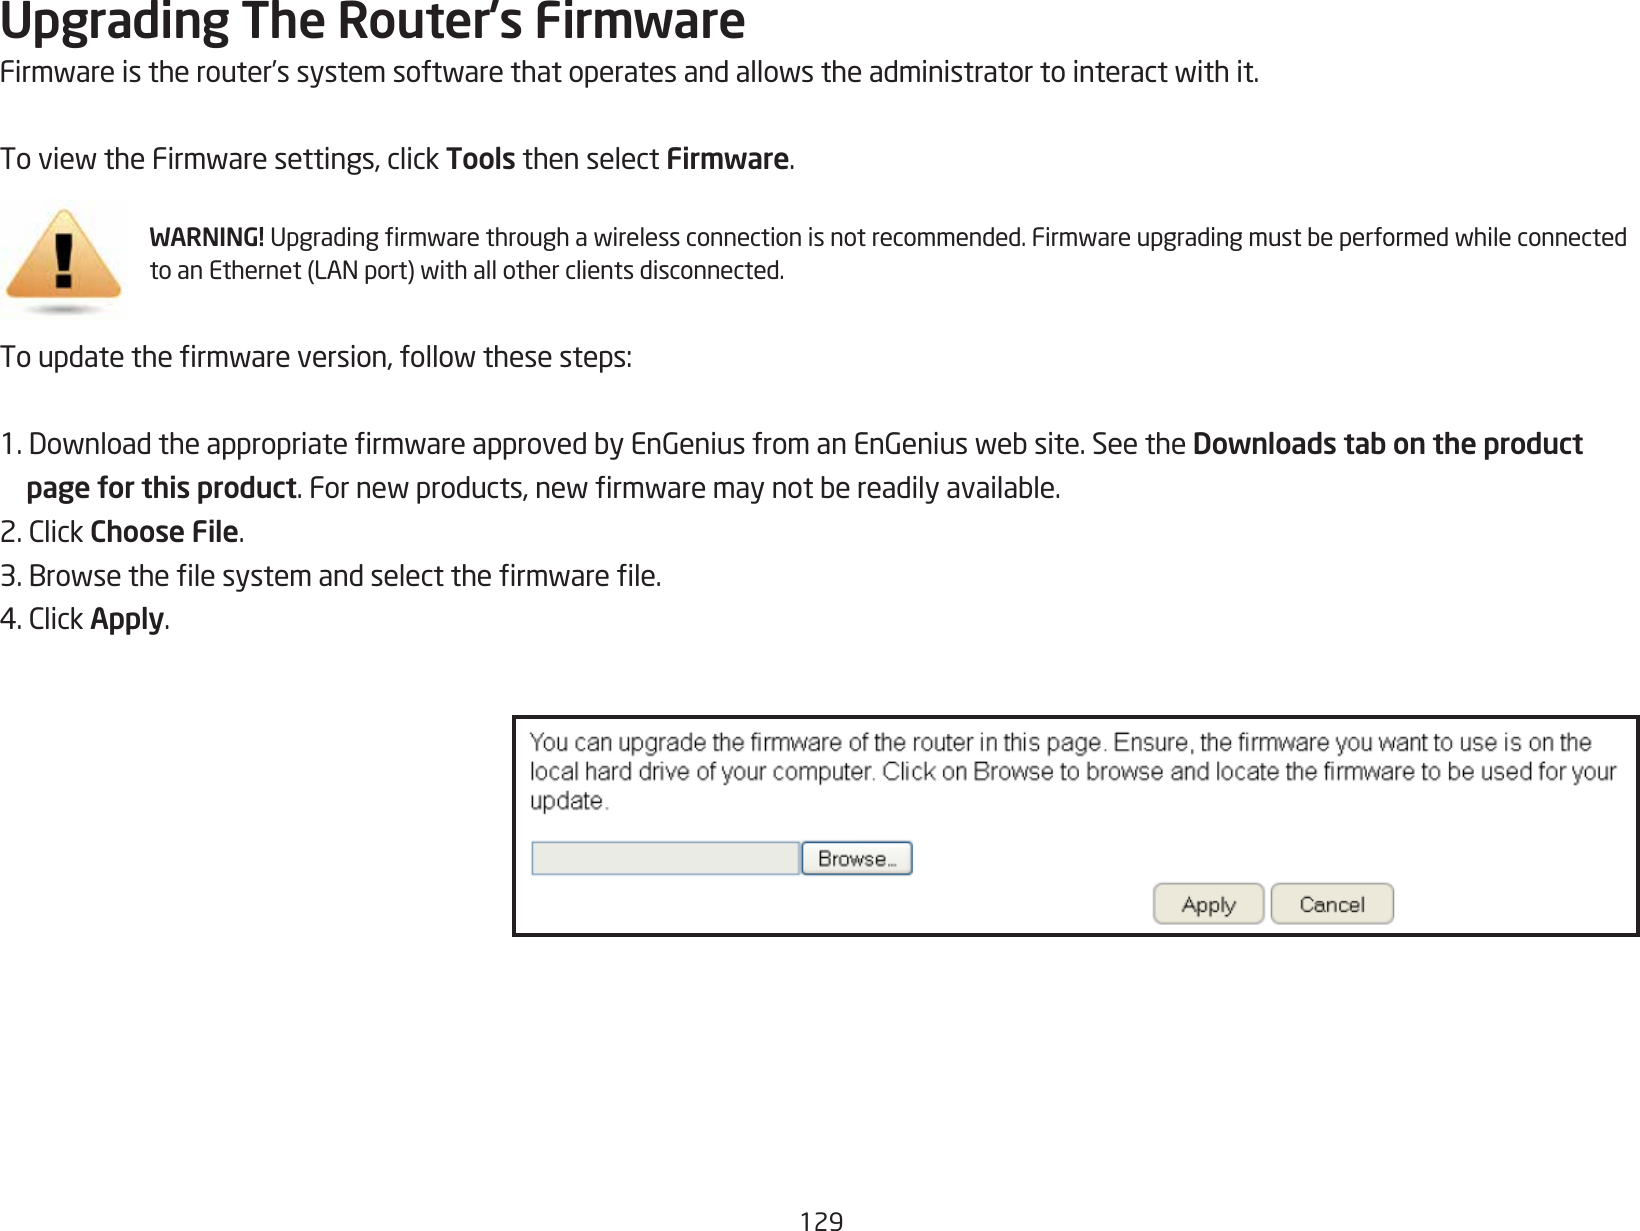 129Upgrading The Router’s FirmwareFirmwareistherouter’ssystemsoftwarethatoperatesandallowstheadministratortointeractwithit.ToviewtheFirmwaresettings,clickTools then select Firmware.WARNING! Upgradingrmwarethroughawirelessconnectionisnotrecommended.FirmwareupgradingmustbeperformedwhileconnectedtoanEthernet(LANport)withallotherclientsdisconnected.Toupdatethermwareversion,followthesesteps:1.DownloadtheappropriatermwareapprovedbyEnGeniusfromanEnGeniuswebsite.SeetheDownloads tab on the product     page for this product.Fornewproducts,newrmwaremaynotbereadilyavailable.2.ClickChoose File.3.Browsethelesystemandselectthermwarele.4.ClickApply.